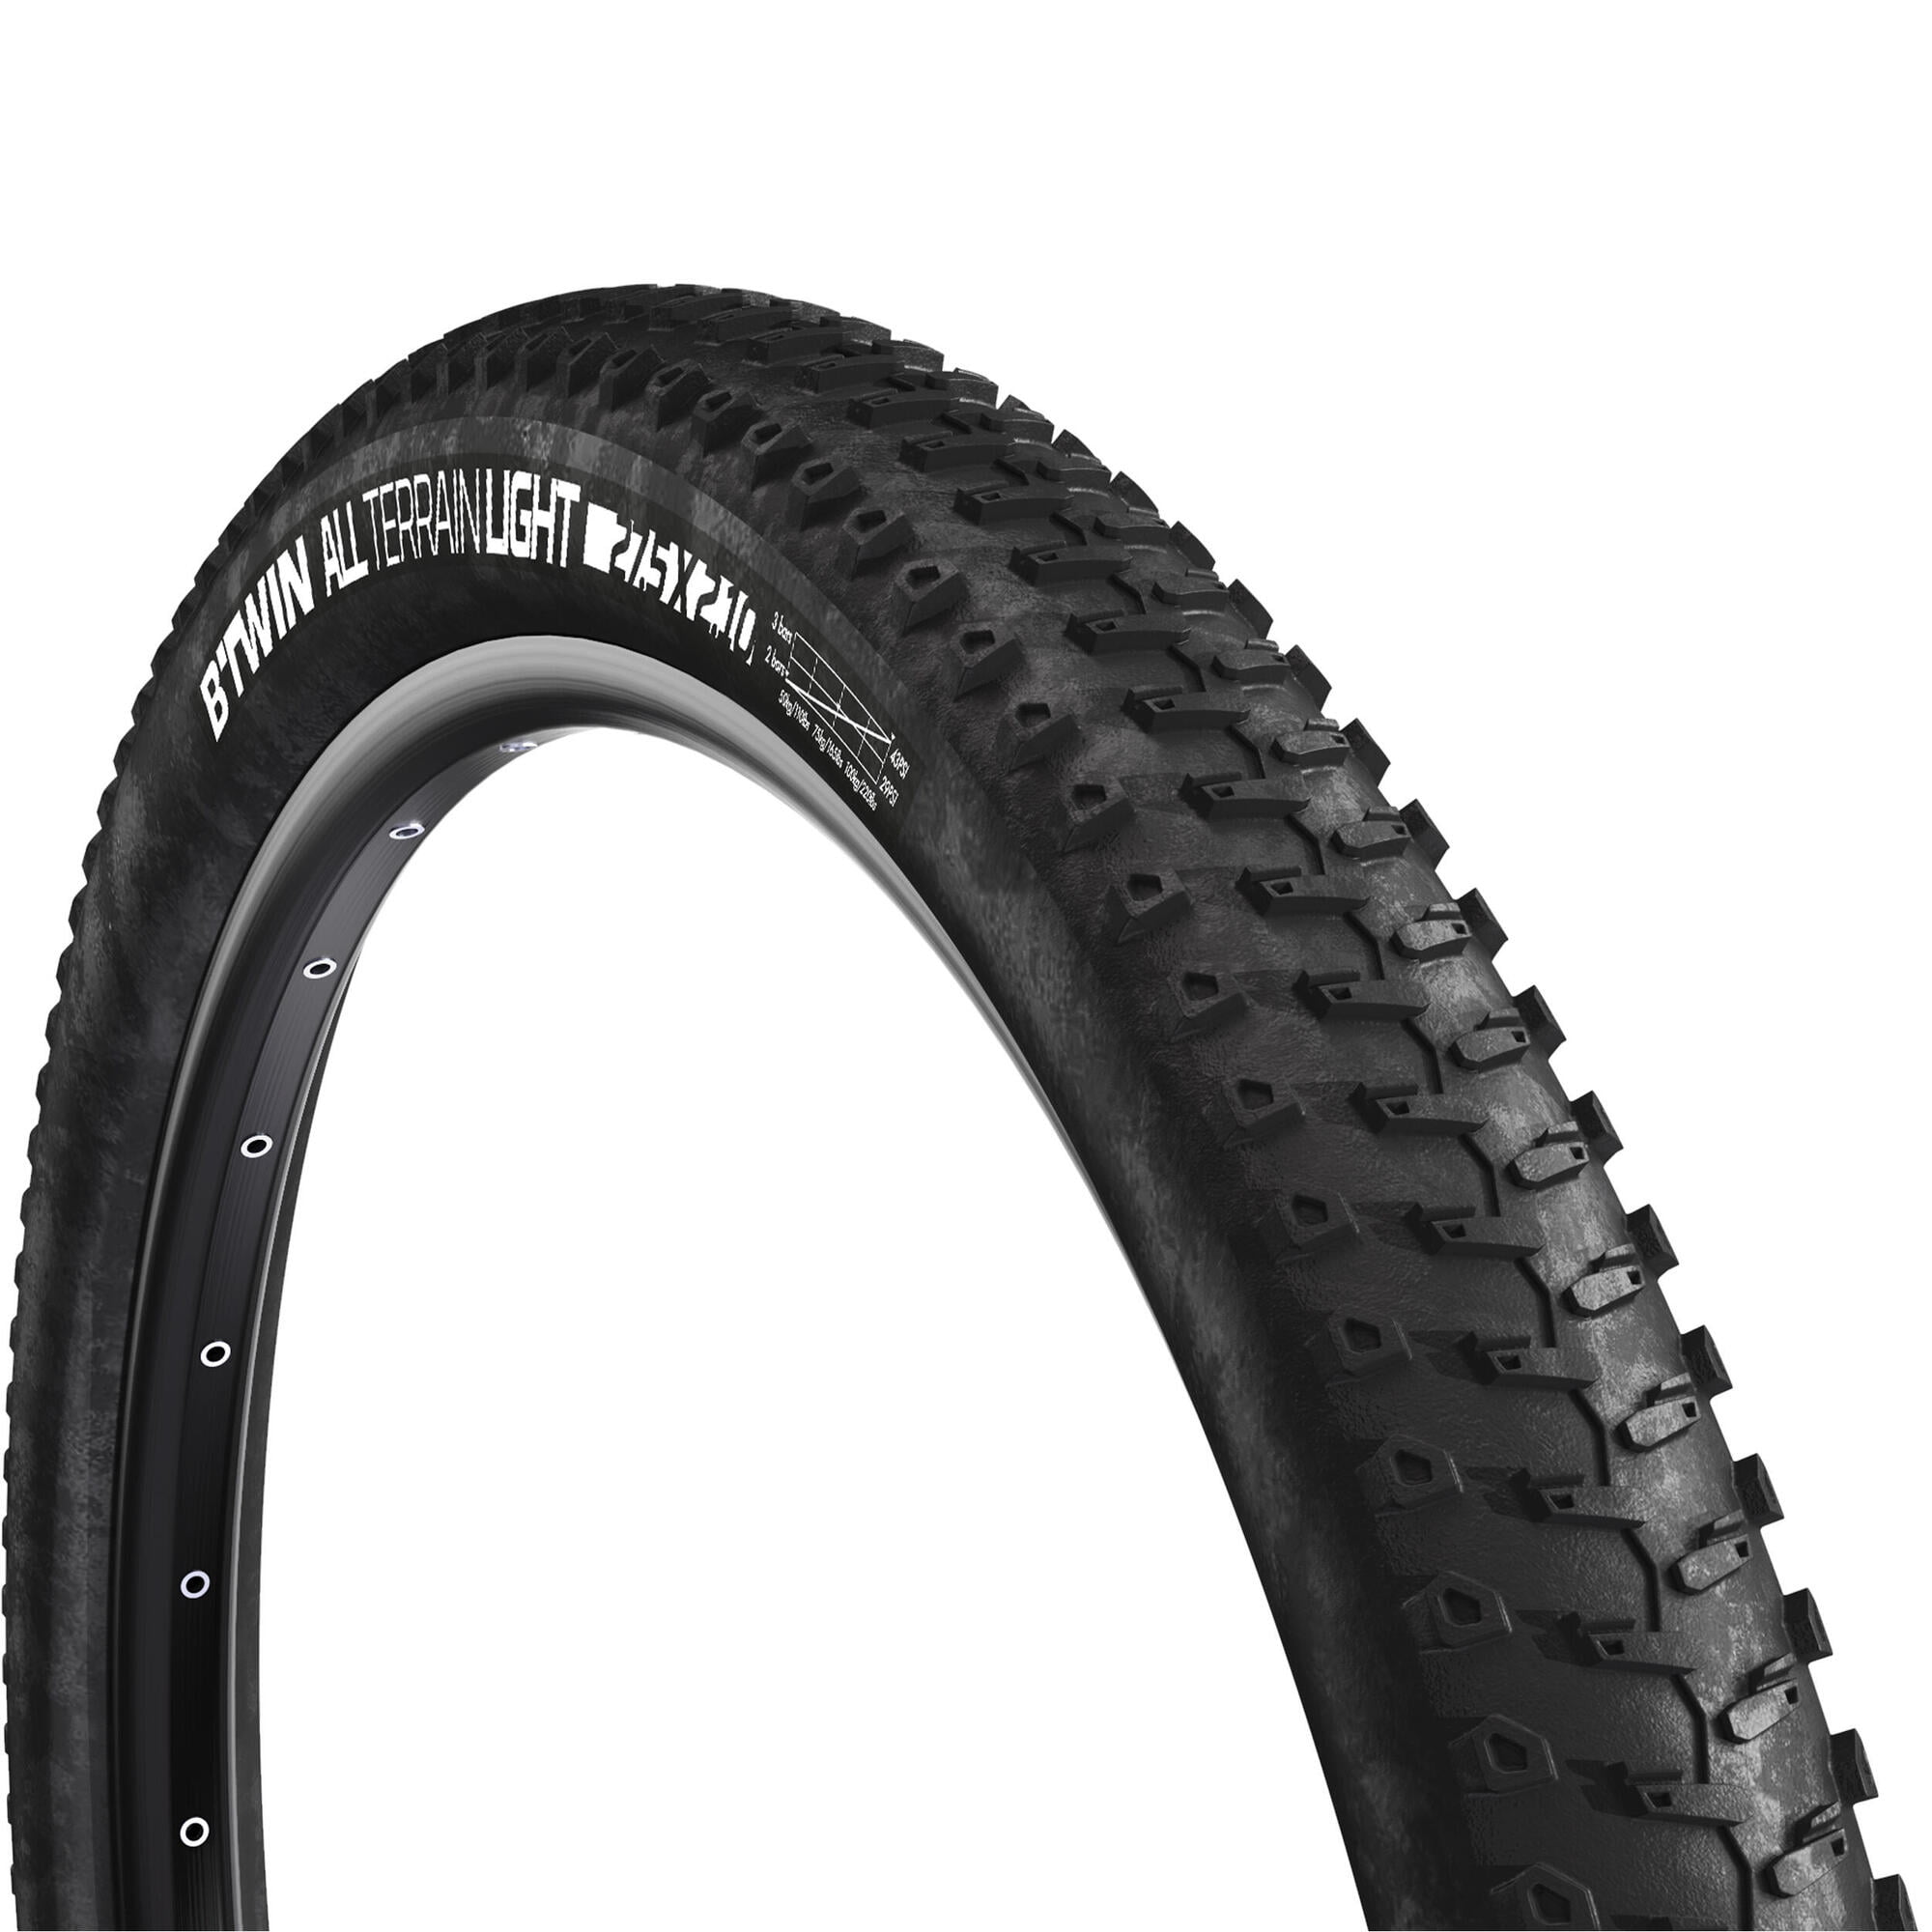 size 27.5 x 2.10 For On and Off-road Deli Tire All Terrain Mountain Bike Tyre